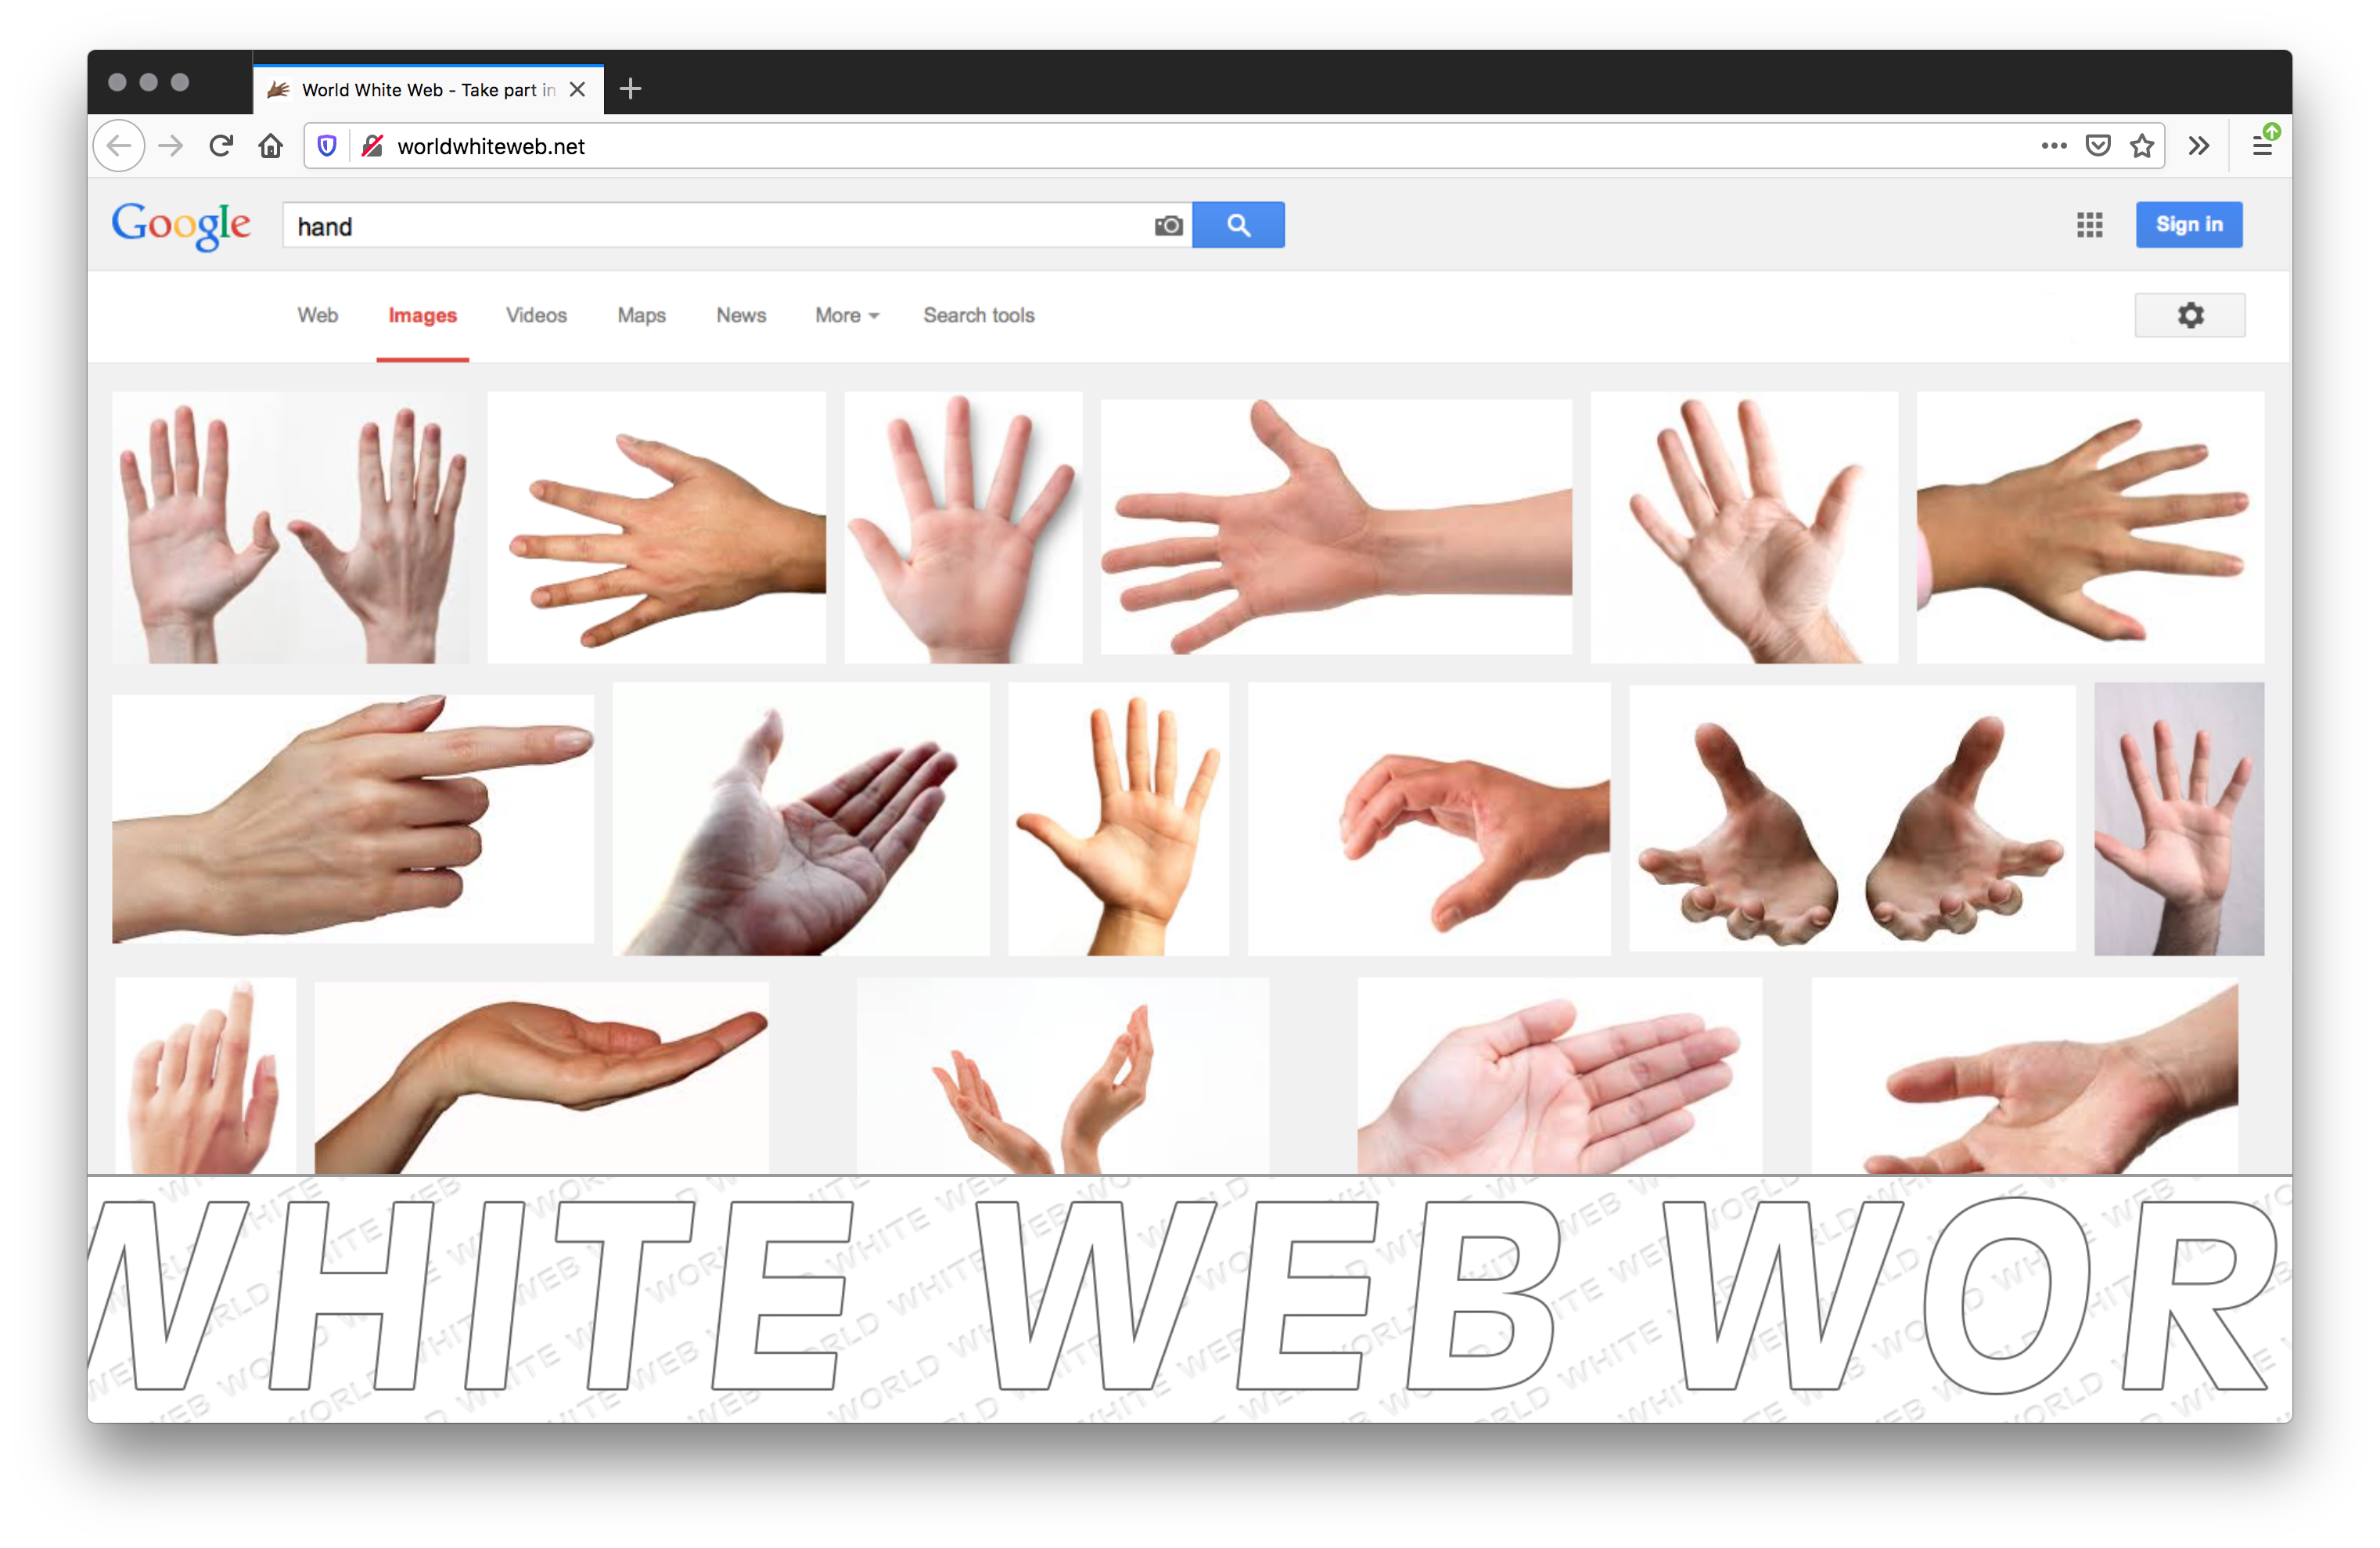 Screenshot of a Google images webpage with rows of different hand gestures in various sized white rectangles. Below is a banner of "White web world" outlined behind a tile of grey text.